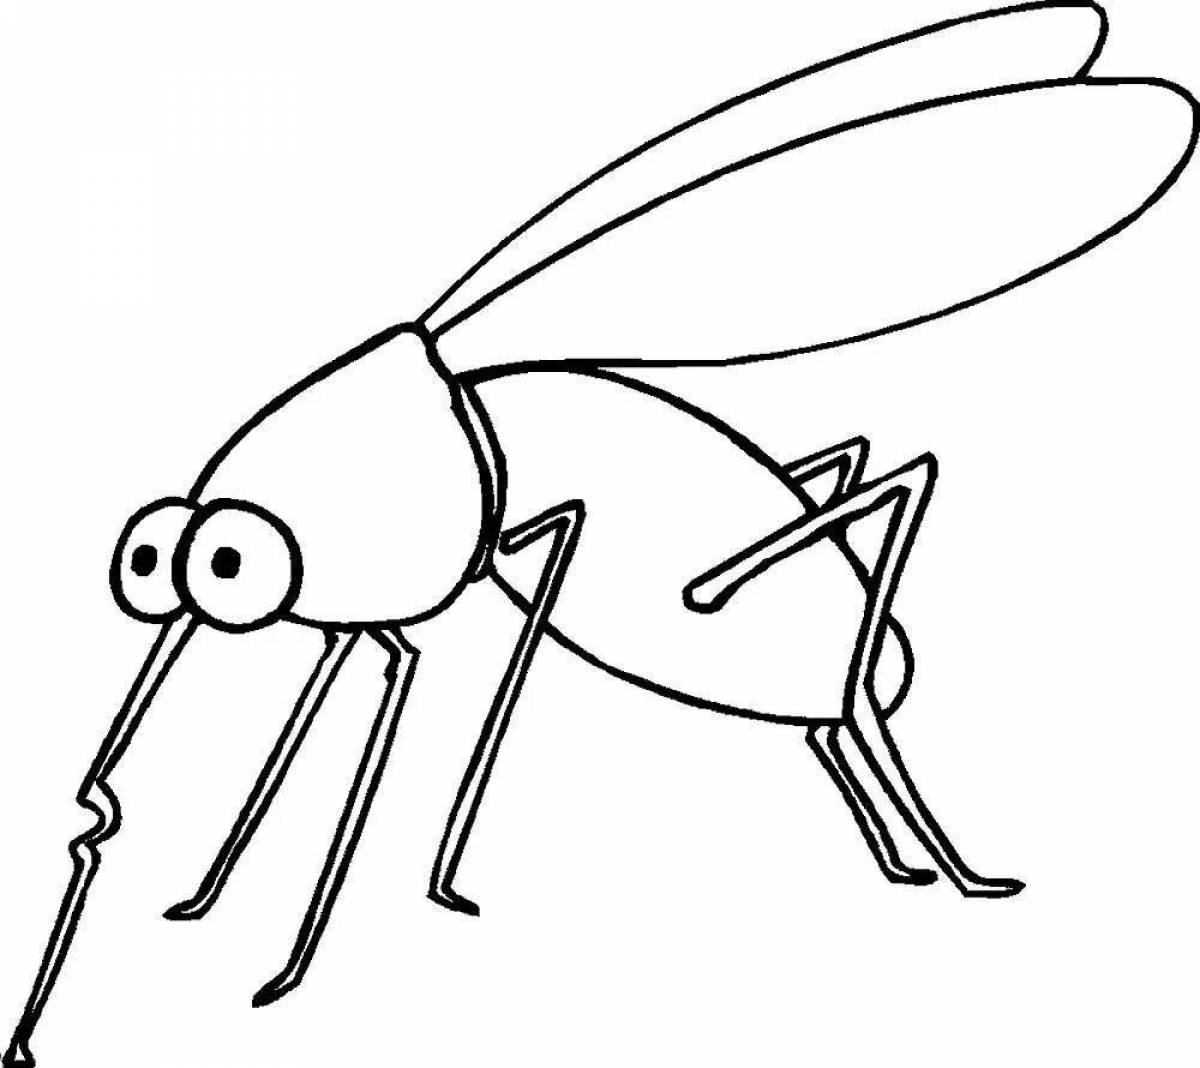 Sweet mosquito coloring page for kids